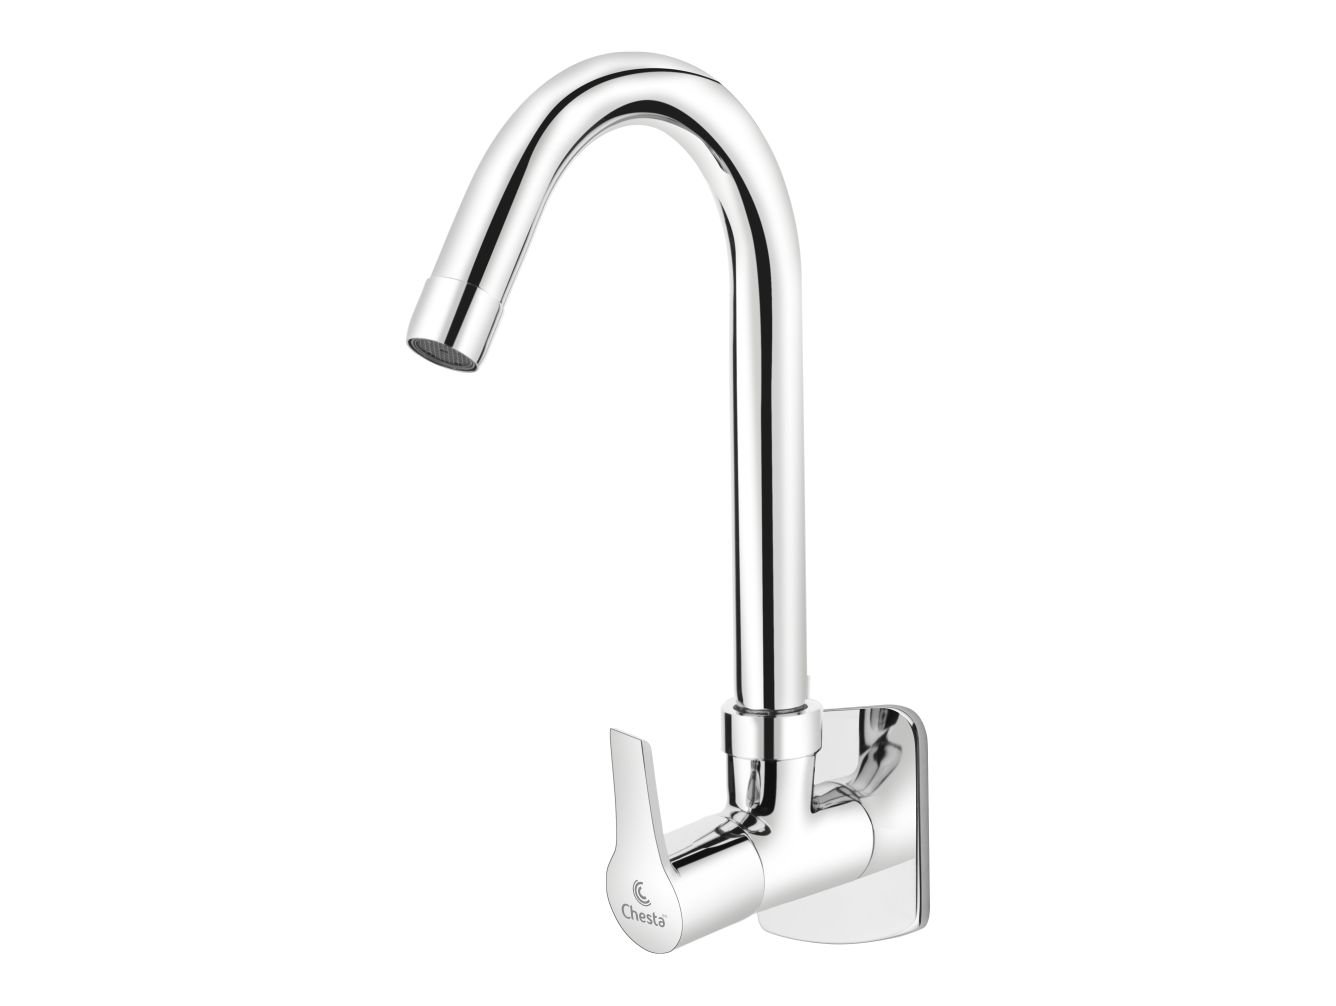 Sink Cock with Wall Flange by Chesta Bath Fittings